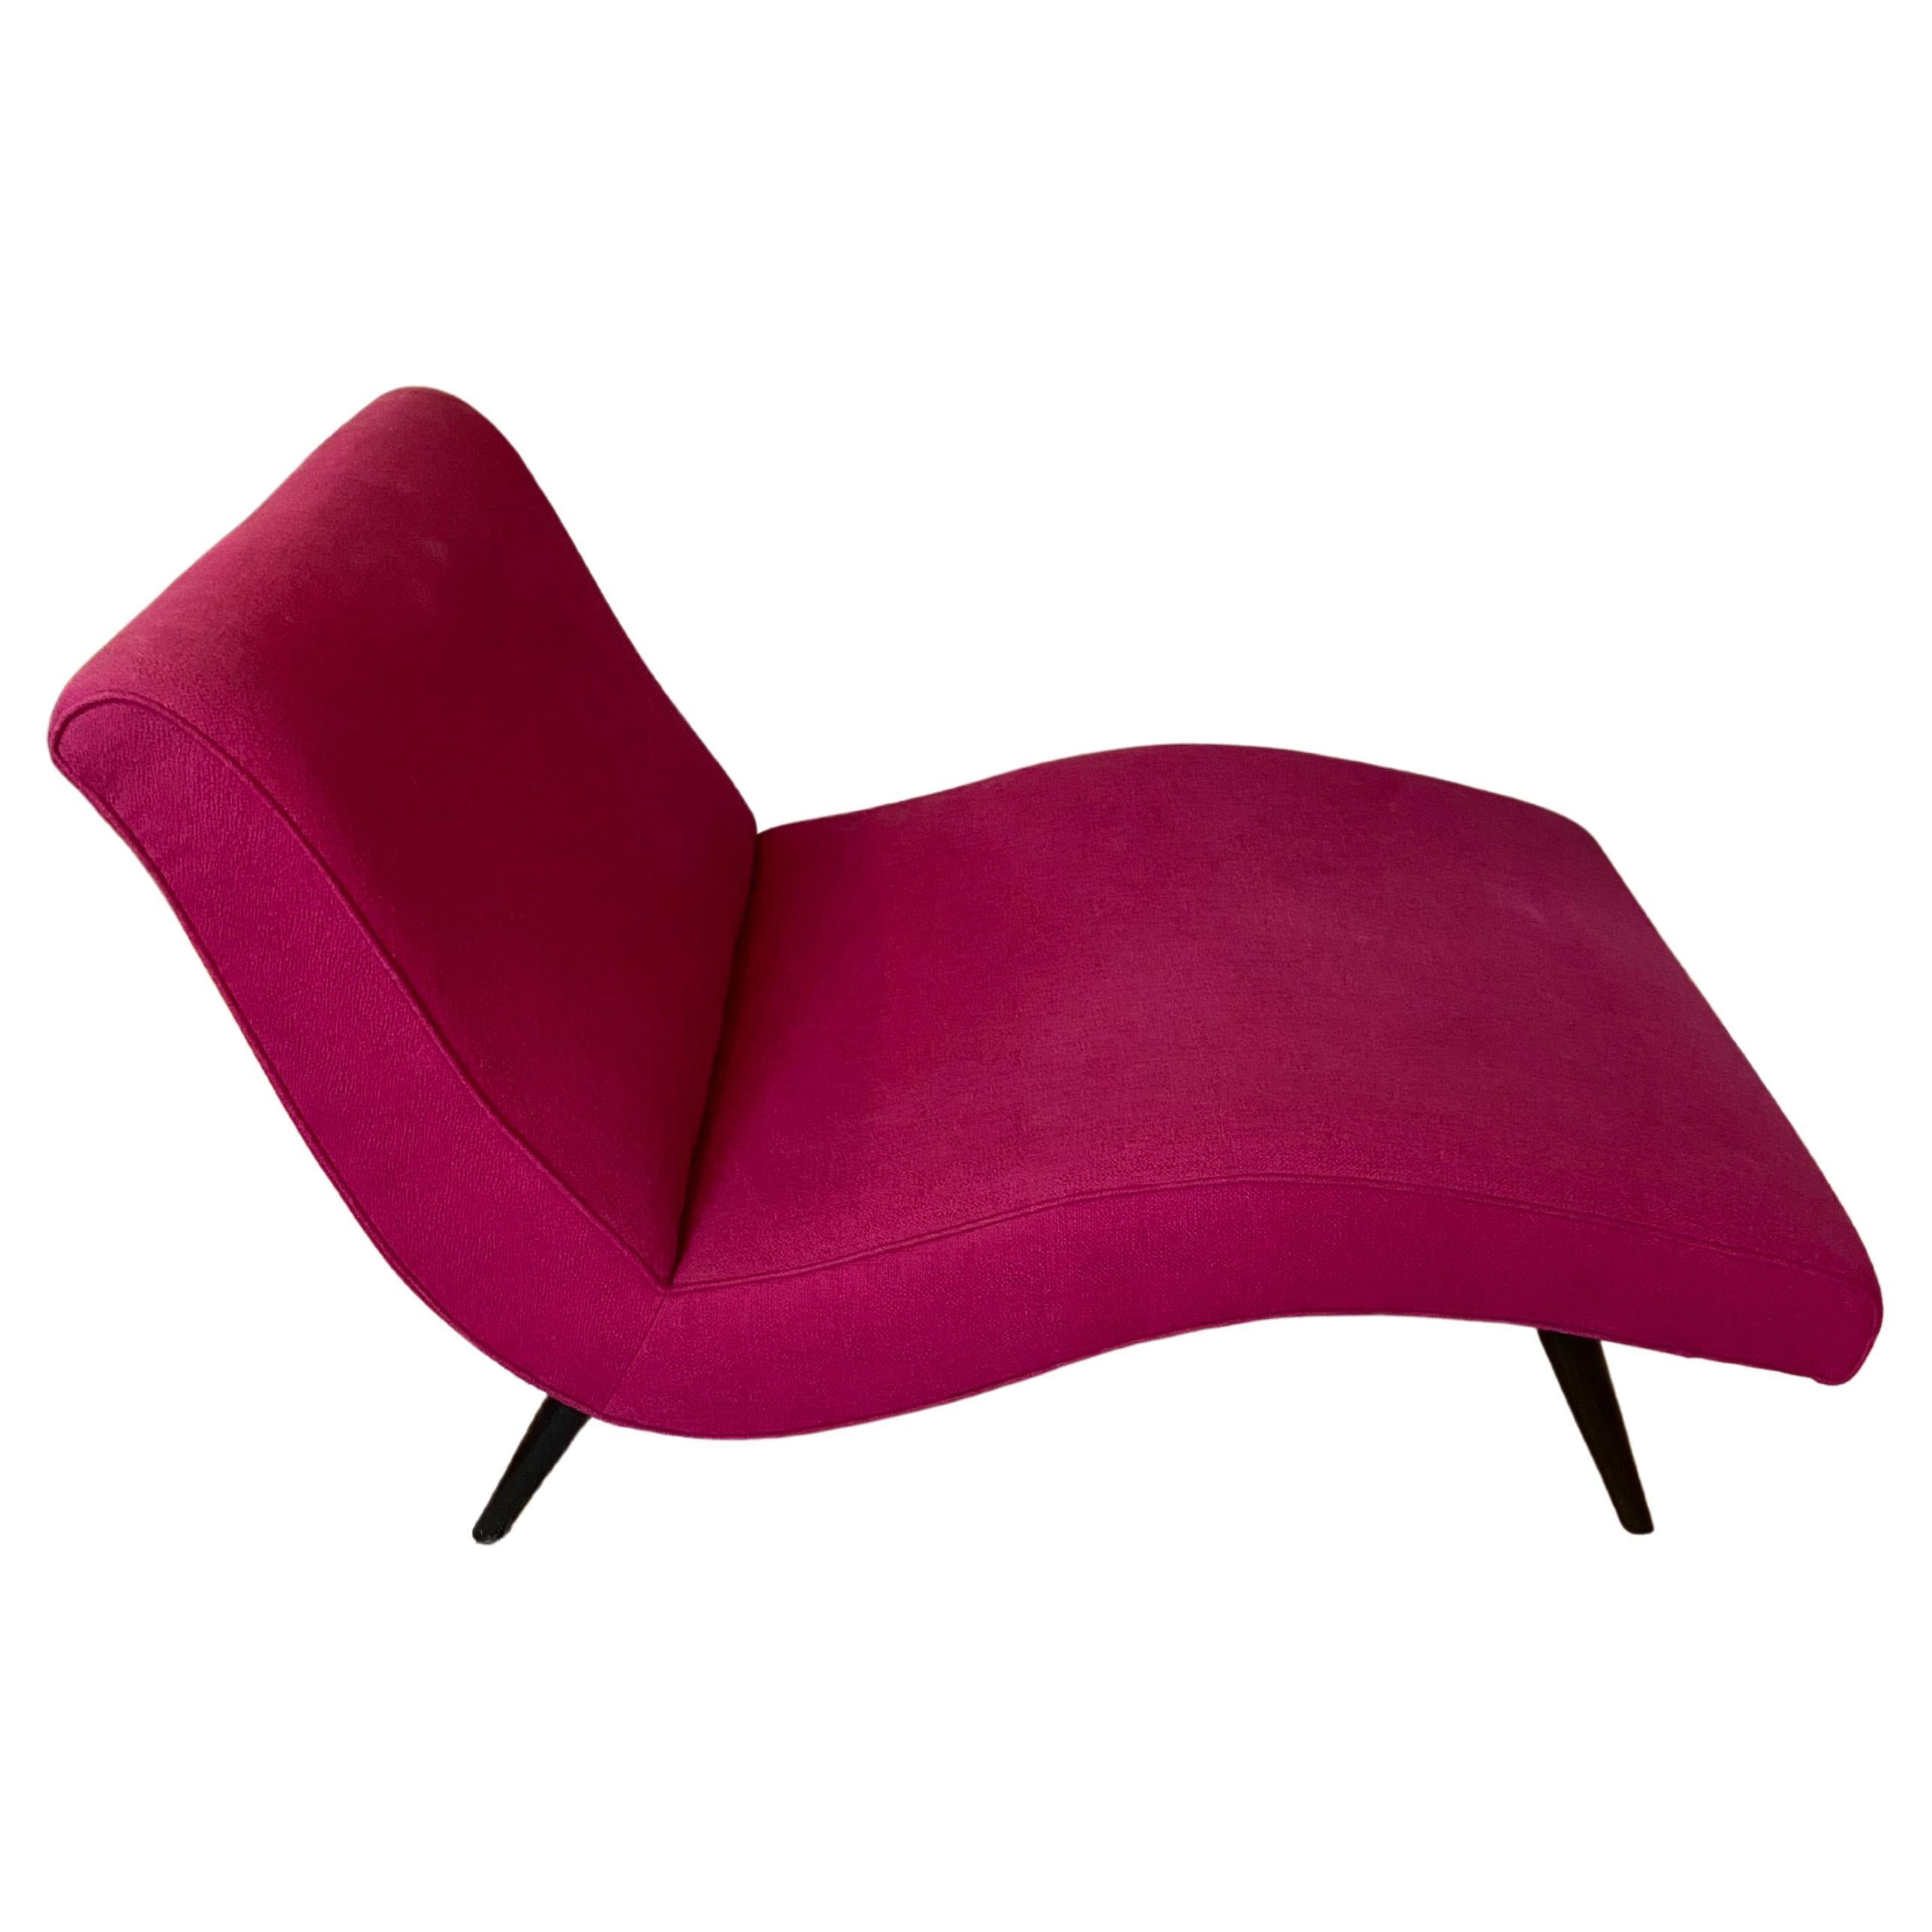 The Adrian Pearsall Wave Chaise Lounge, originating from the 1970s and designed for Craft Associates, has recently been reupholstered using Knoll fabric. This chaise lounge is recognized for its iconic design.

Adrian Pearsall, who lived from 1925